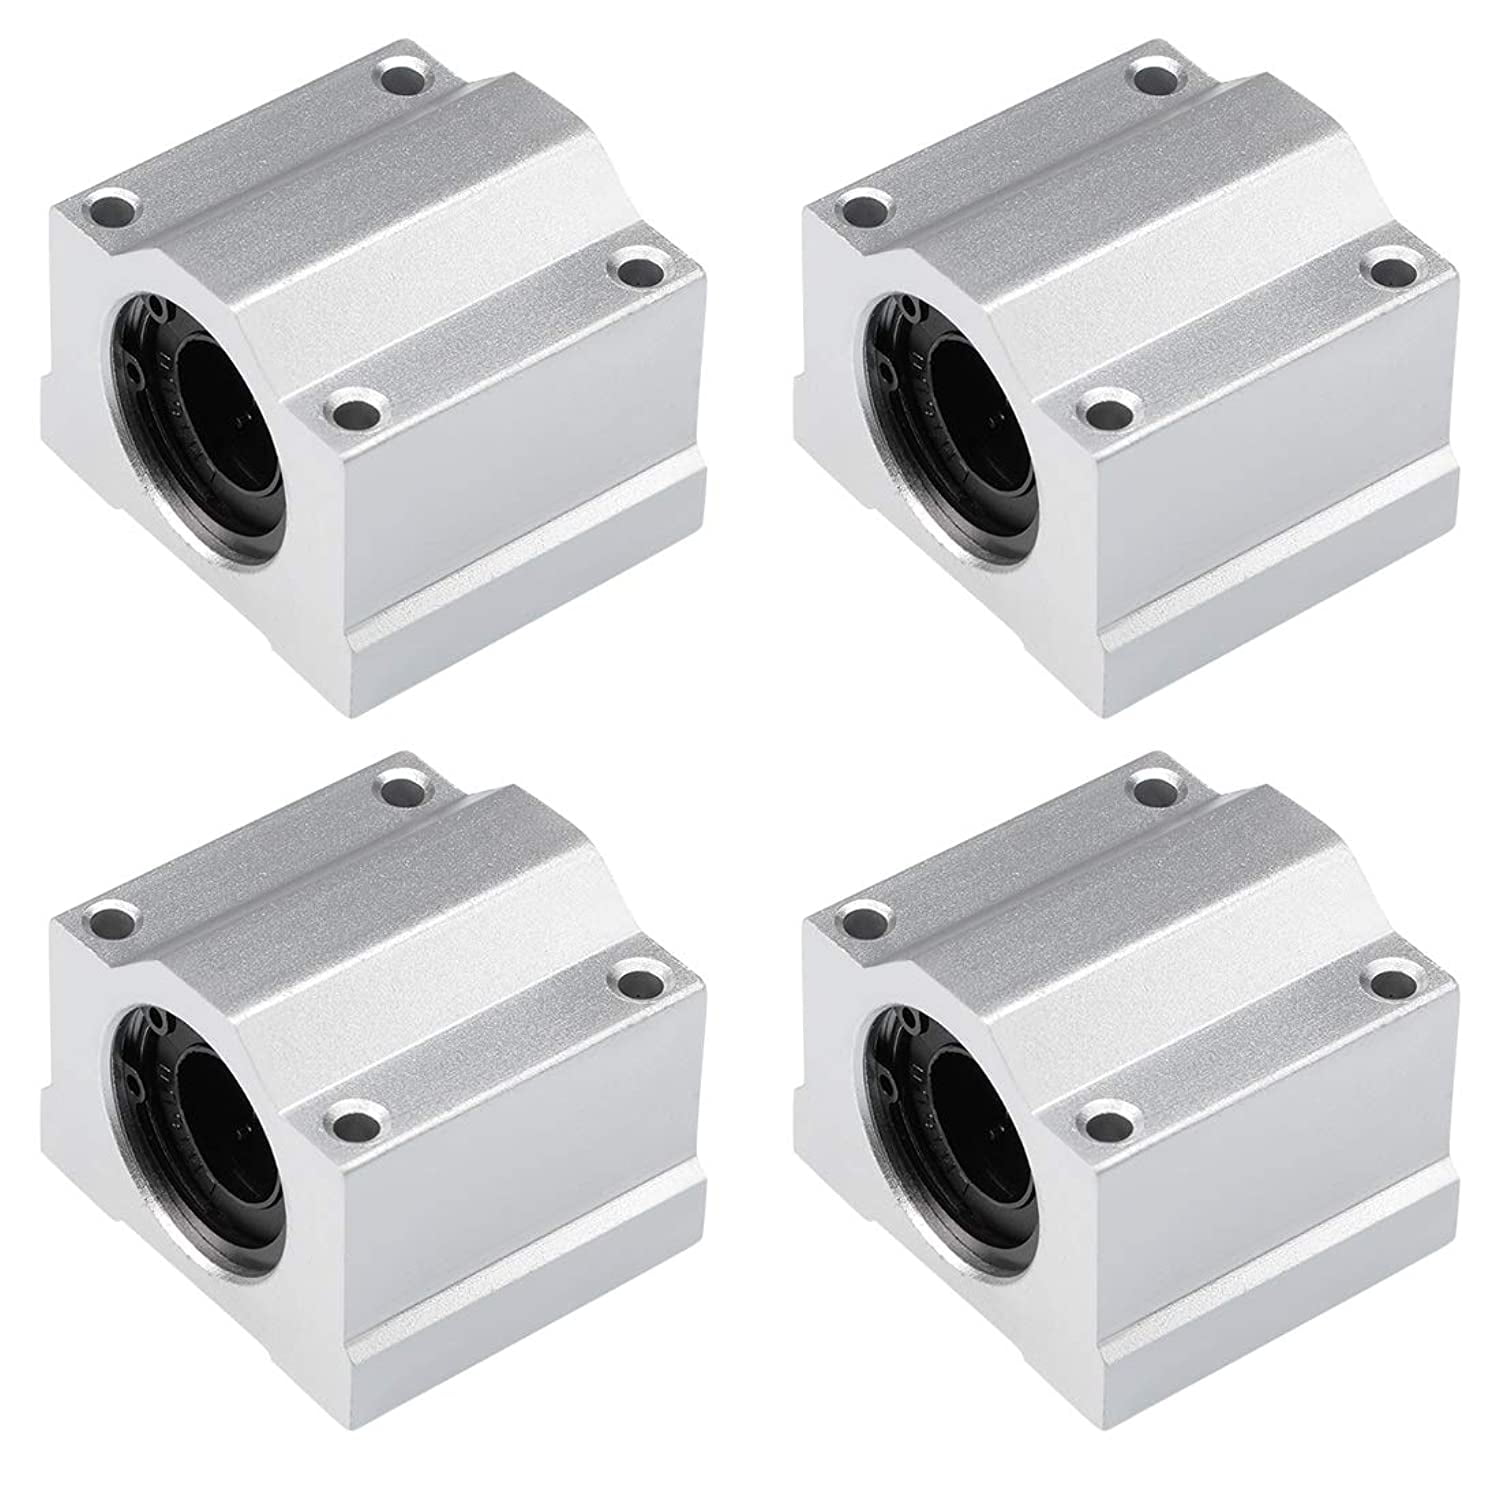 16mm Bore Dia uxcell SCS16UU Linear Ball Bearing Slide Block Units Pack of 4 